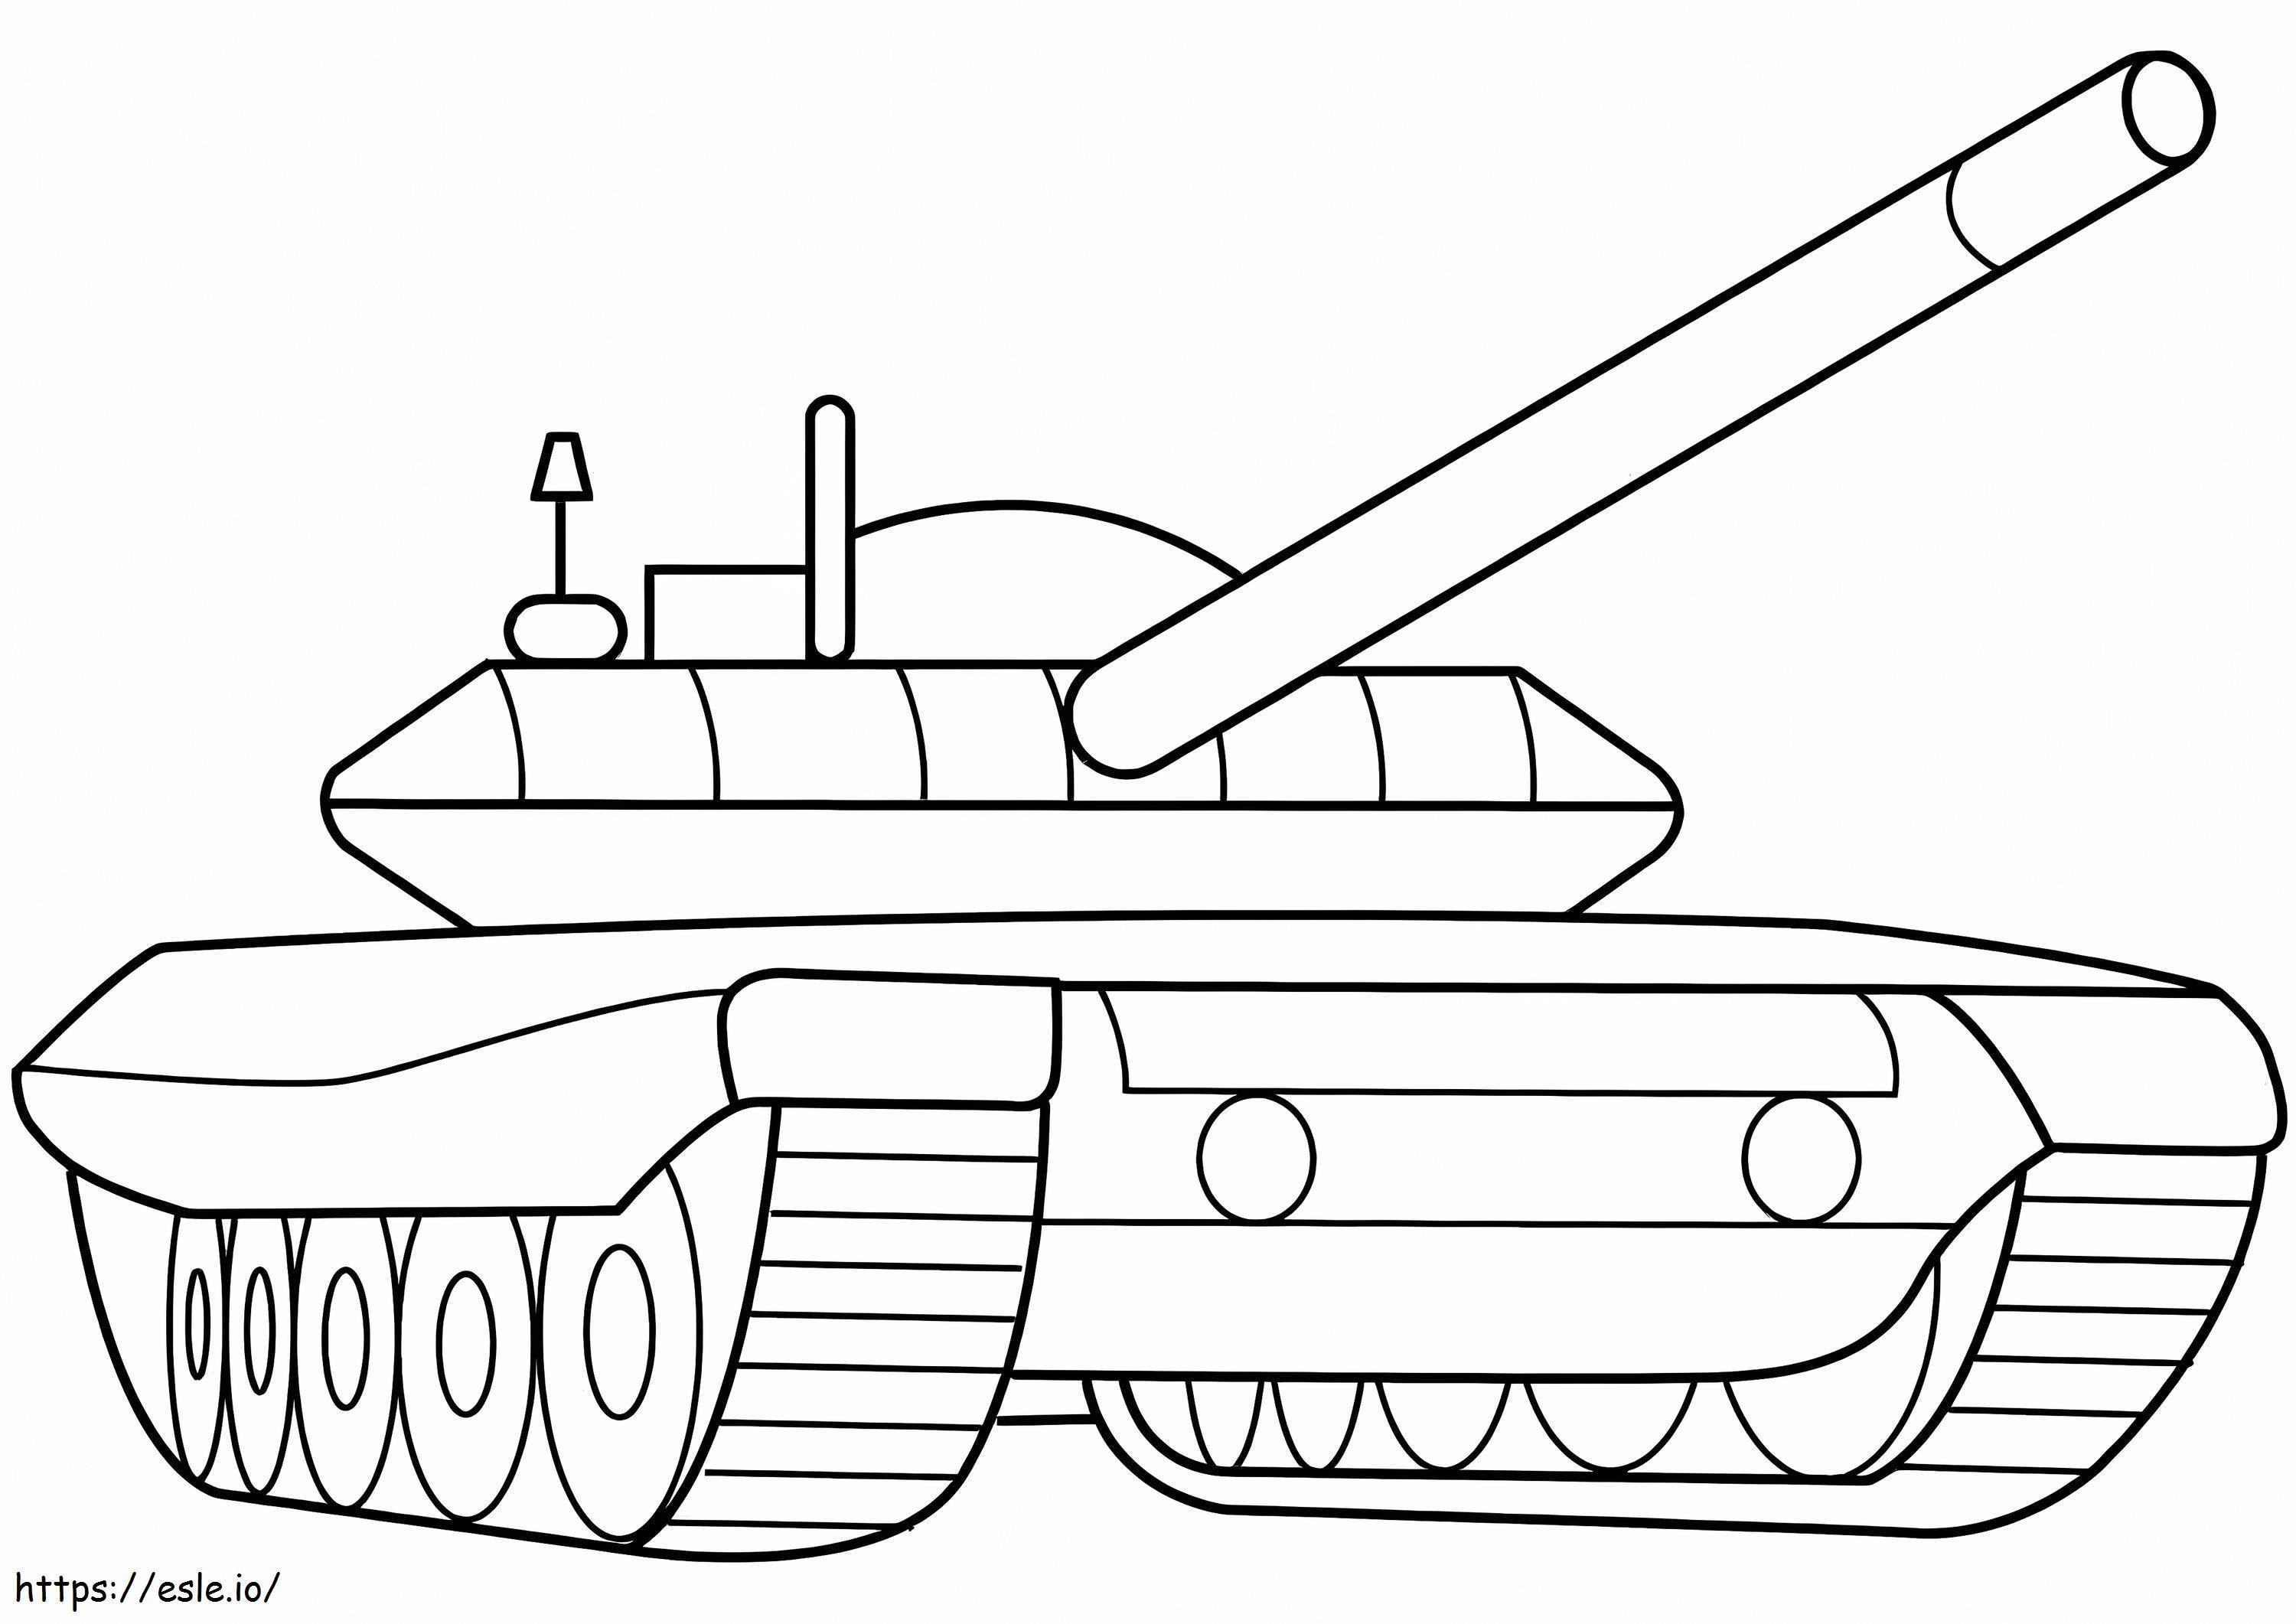 Military Armored Tank coloring page